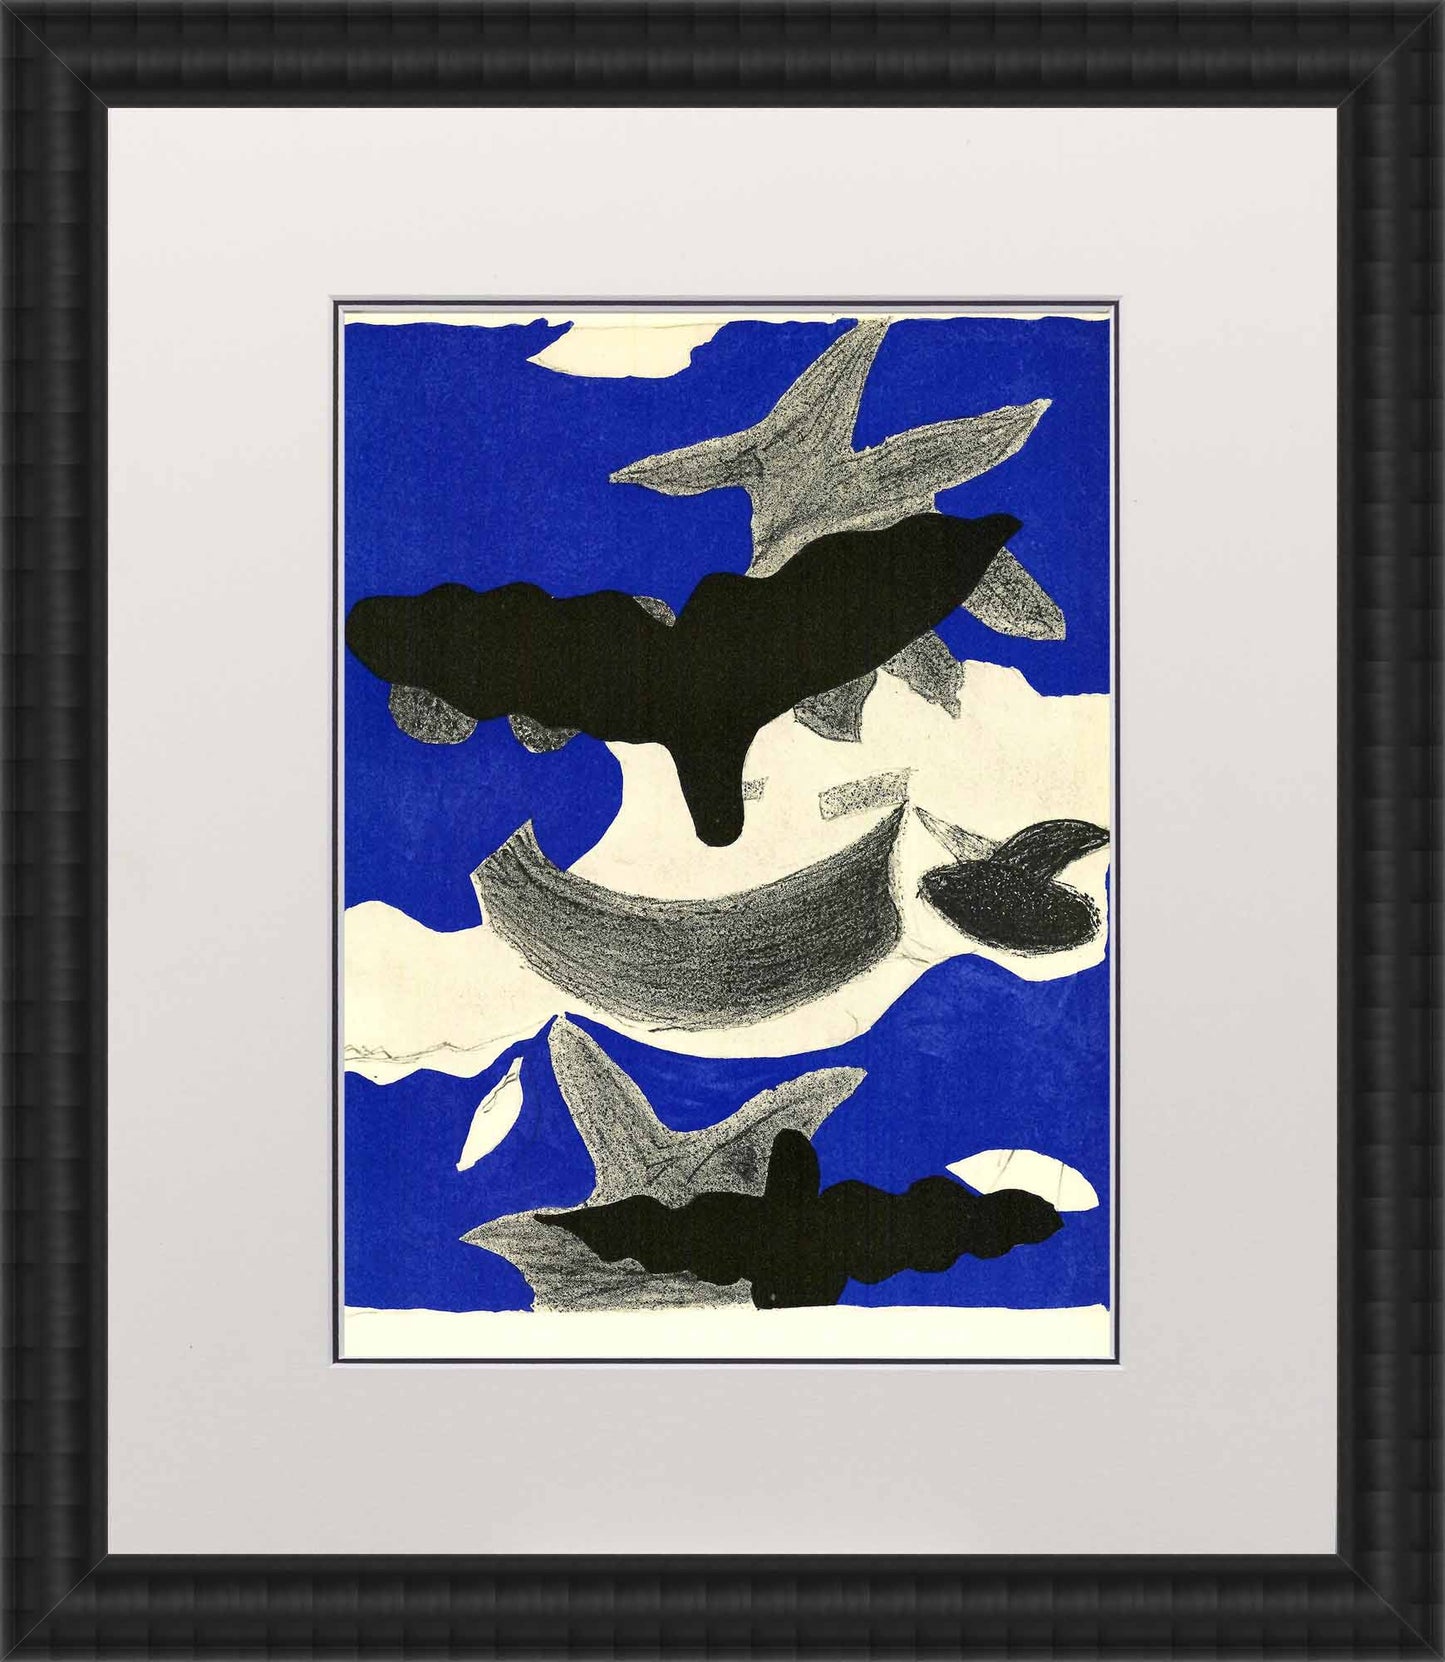 Georges Braque, "Untitled XI"